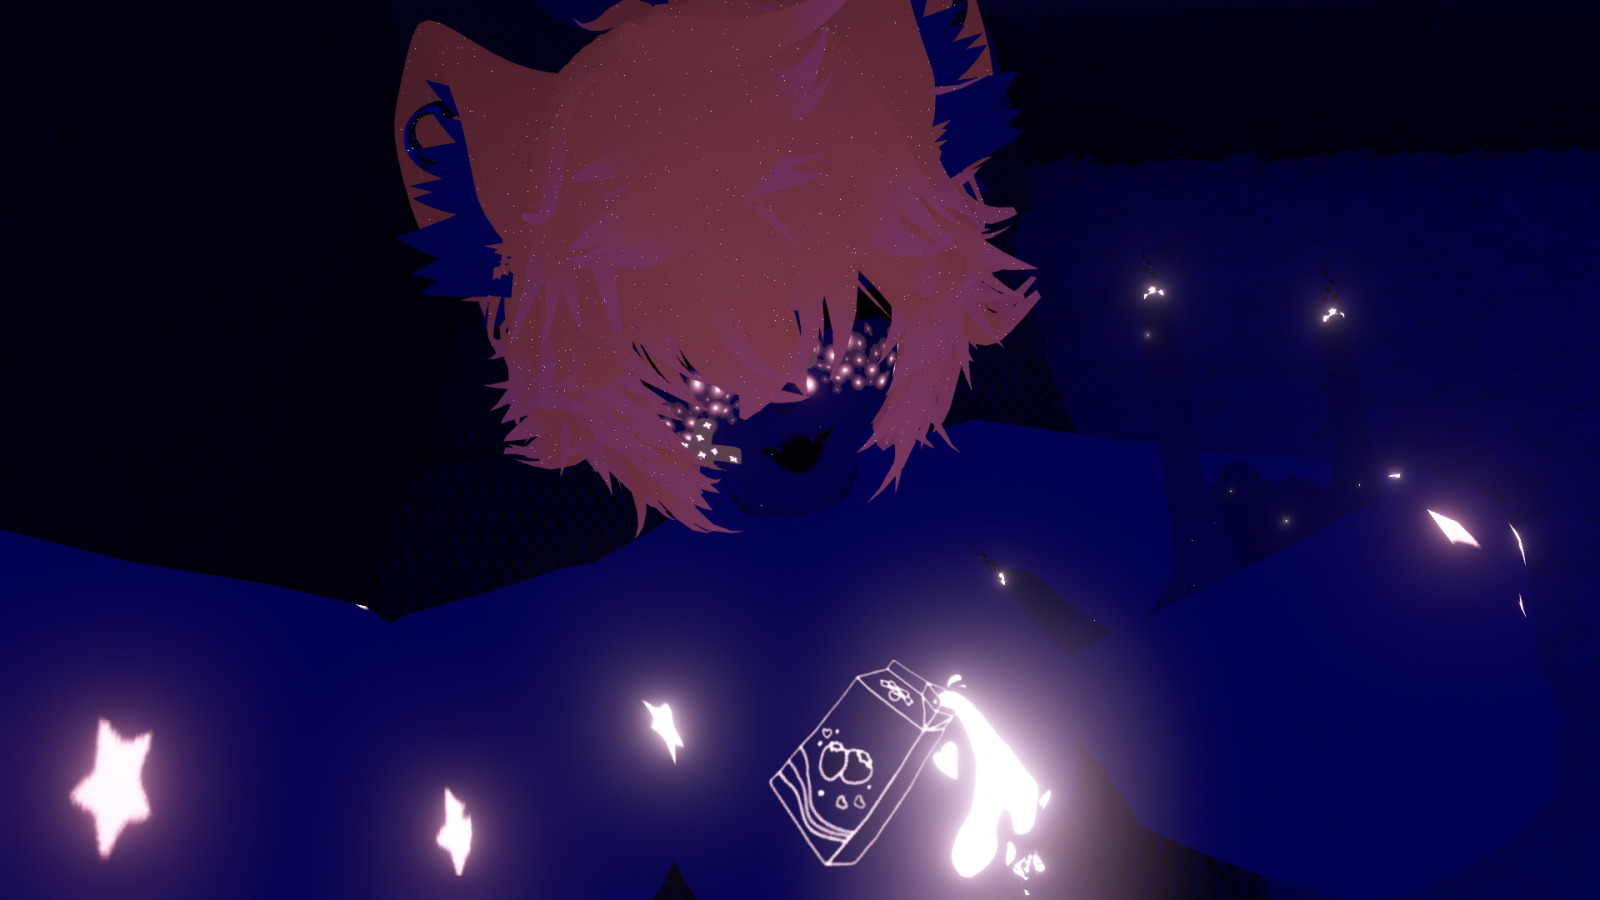 VRChat_1920x1080_2022-09-18_21-31-34.231.png